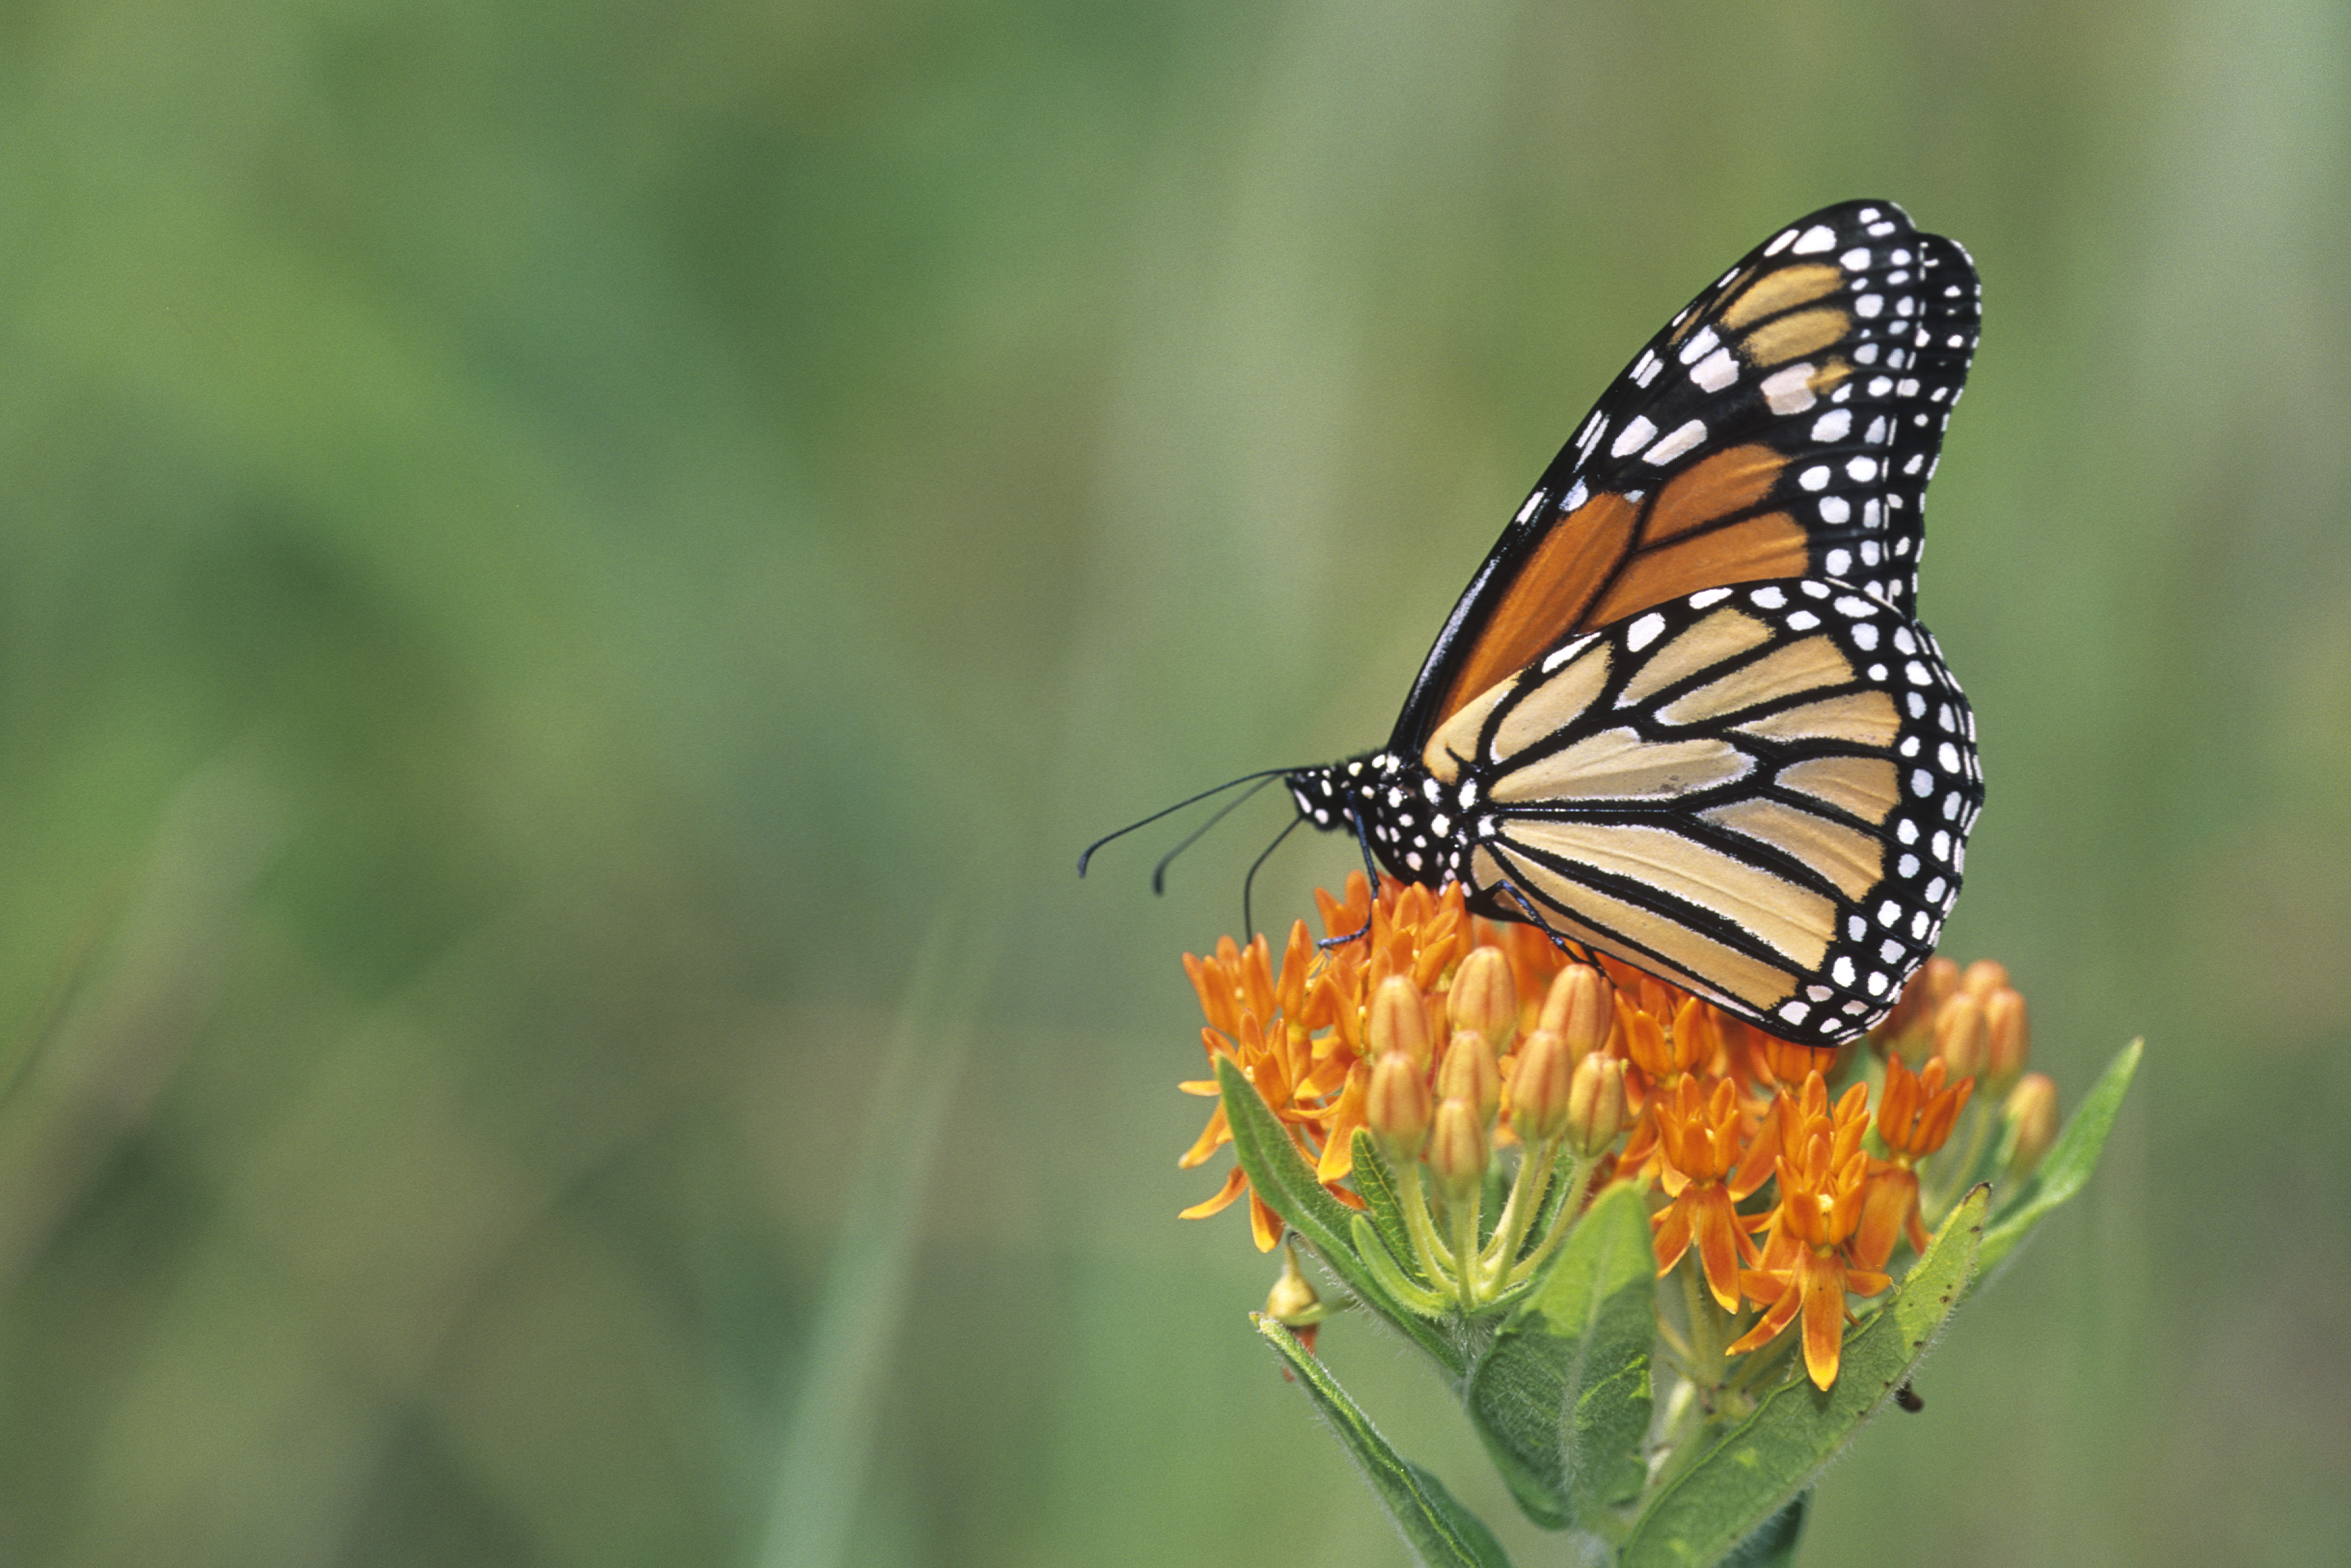 An orange monarch perches regally atop a flower. The green background is blurred out.